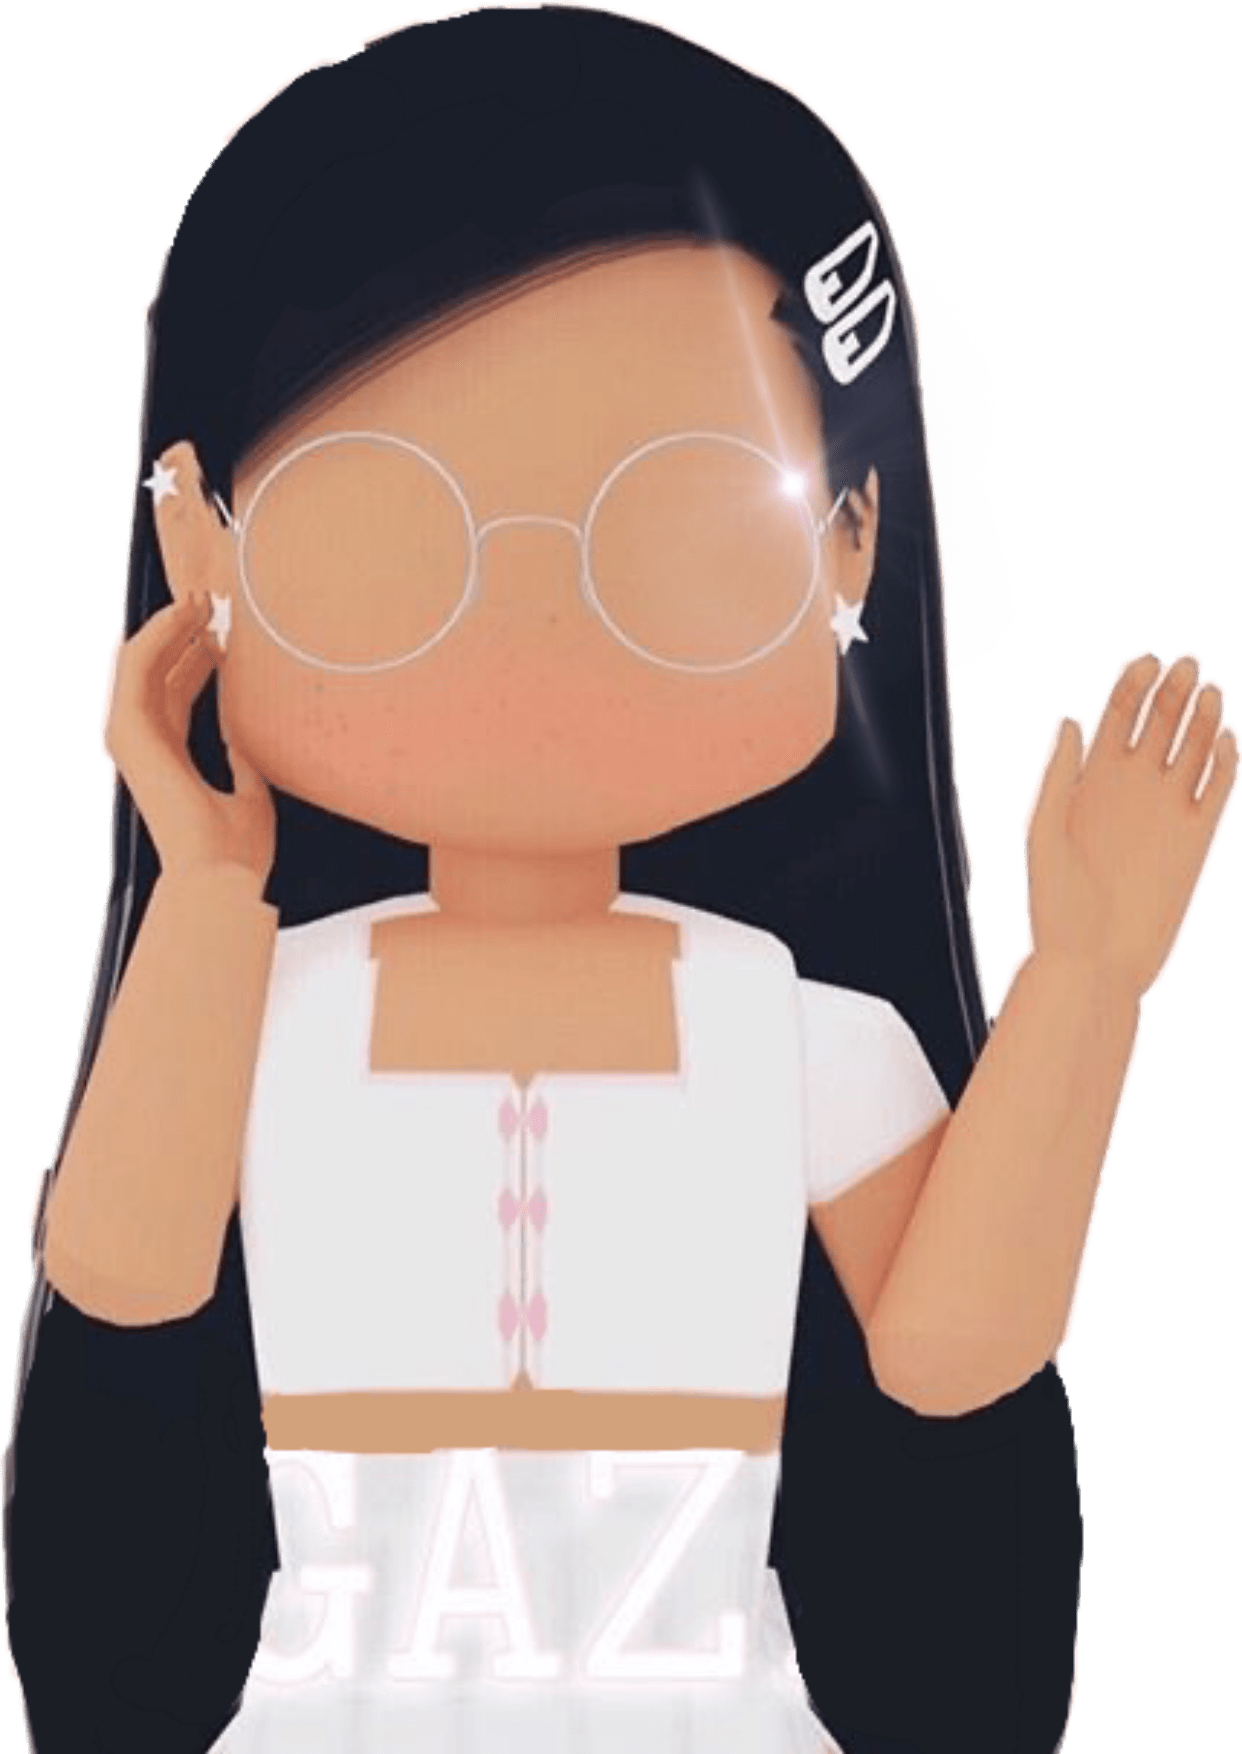 Aesthetic Roblox Girl Wallpapers Top Free Aesthetic Roblox Girl